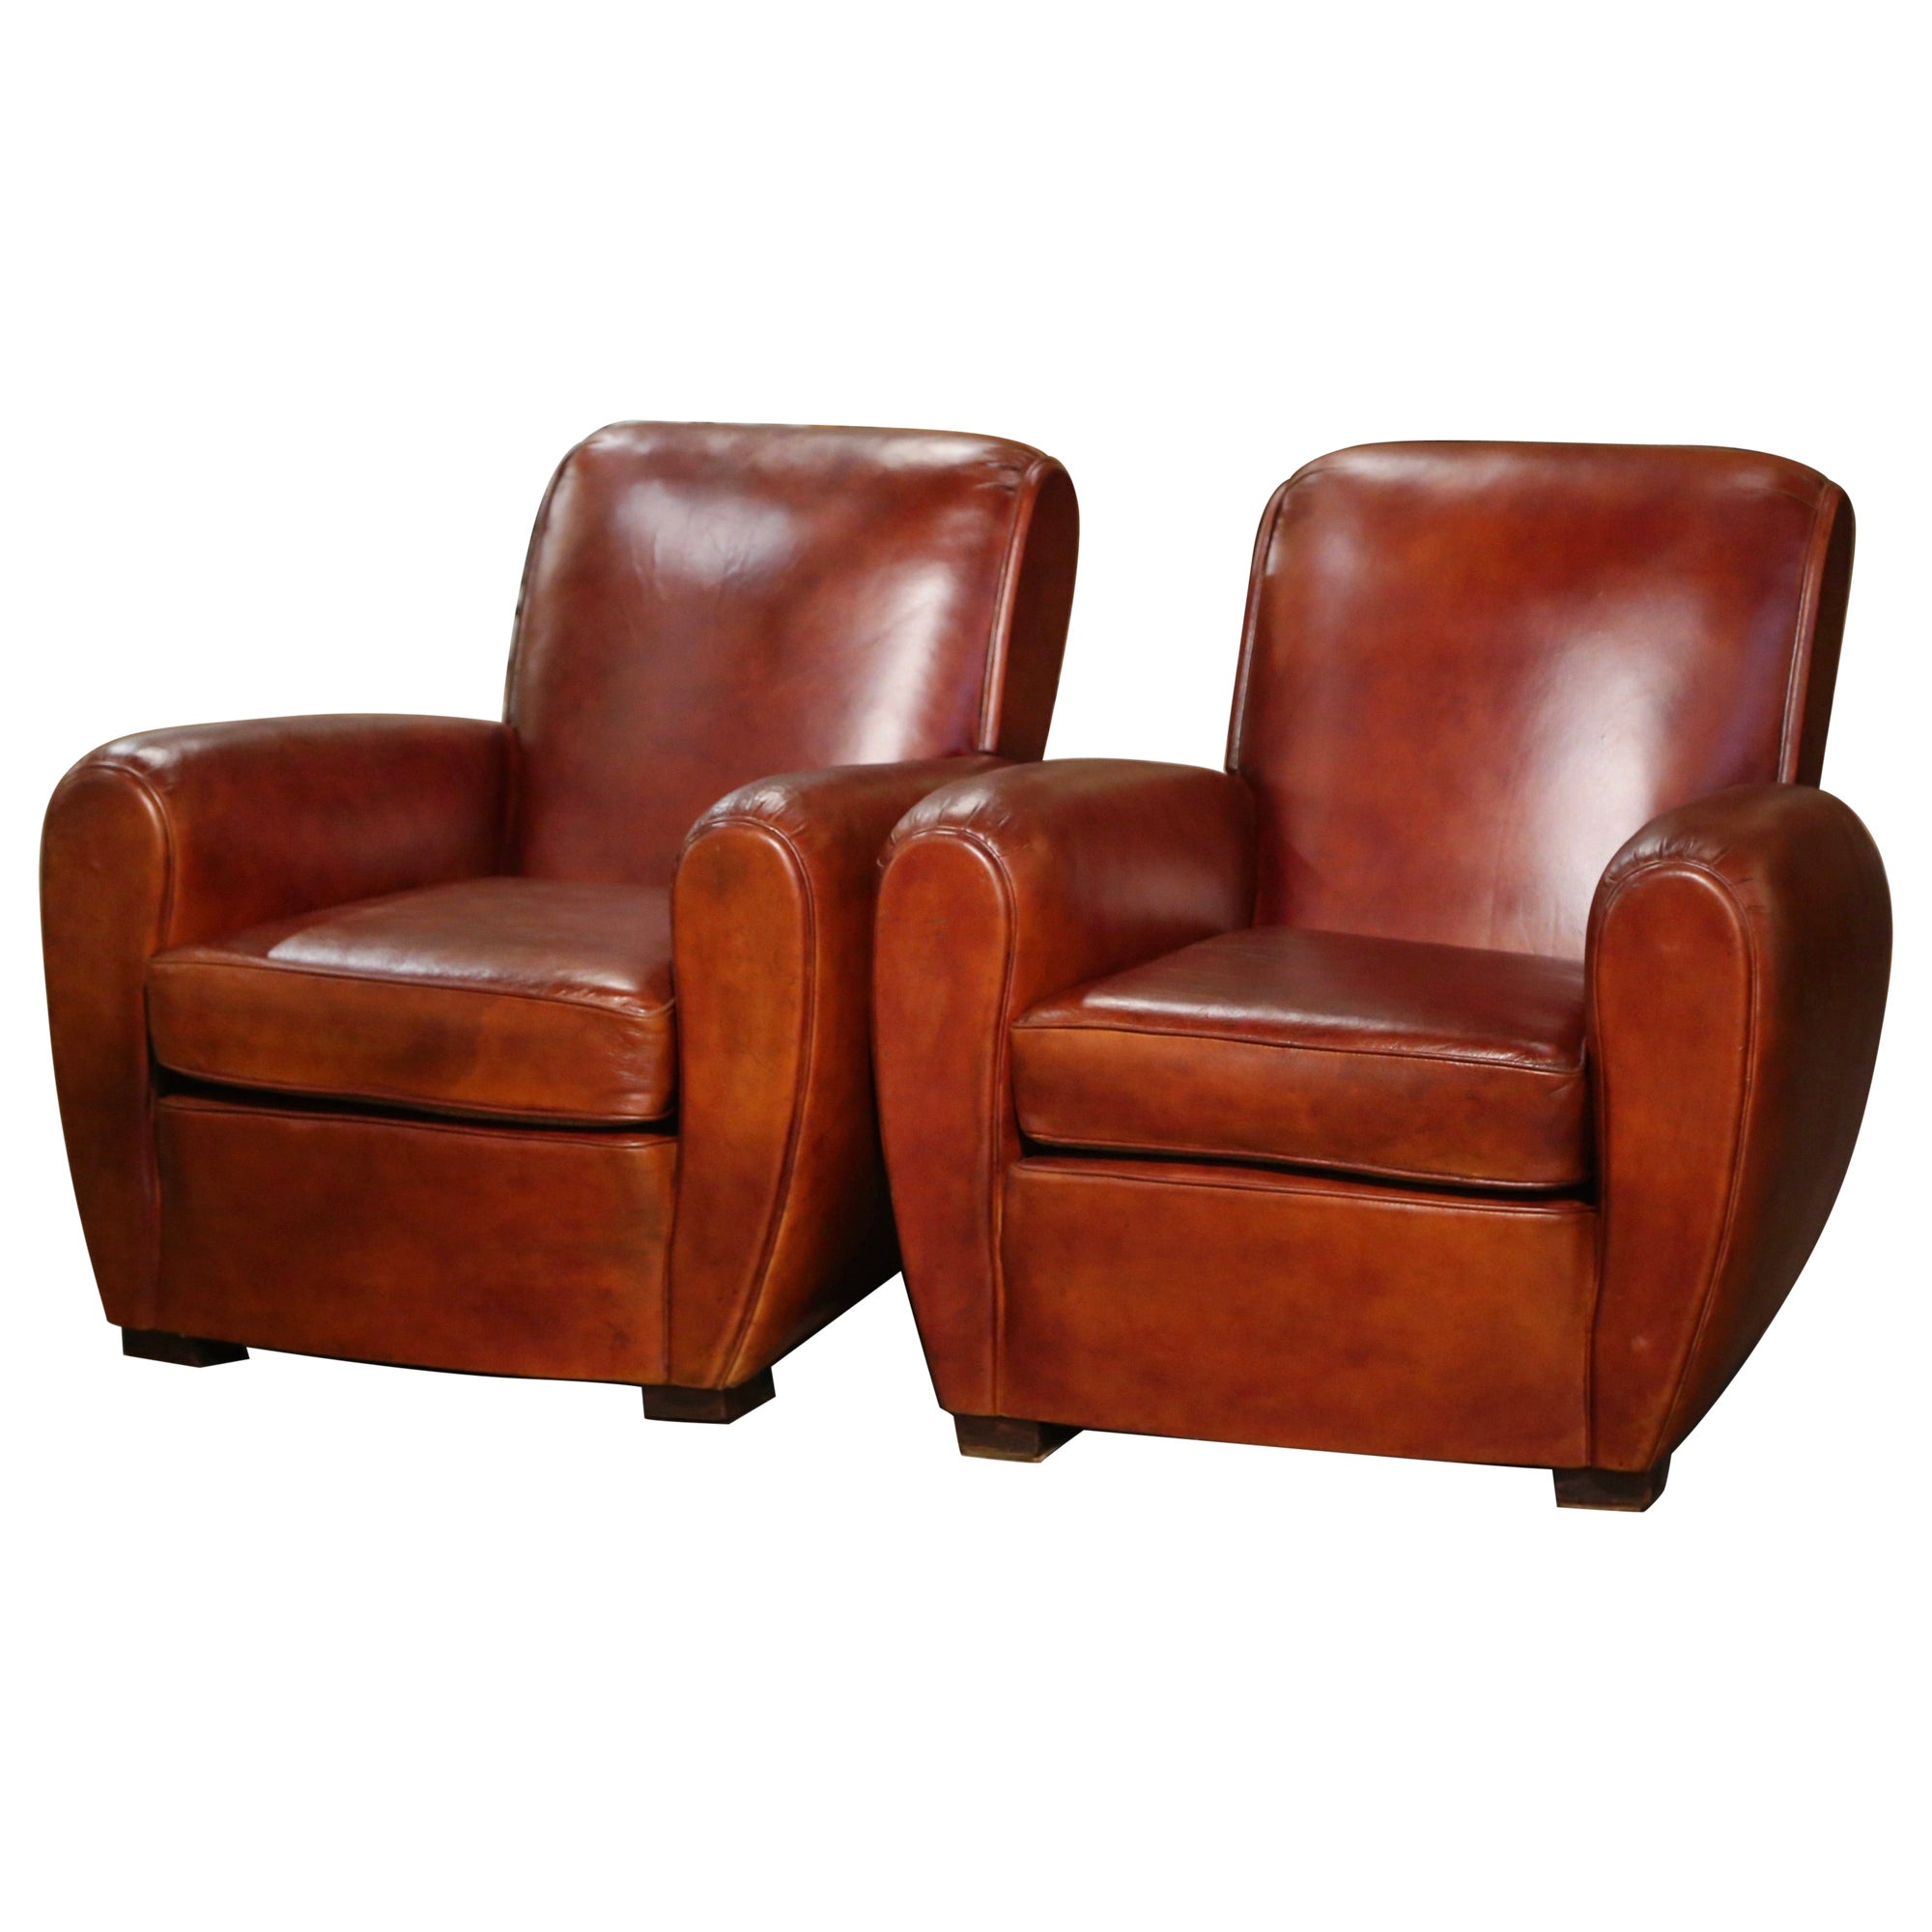 Pair of Early 20th Century French Art Deco Brown Leather Club Armchairs 